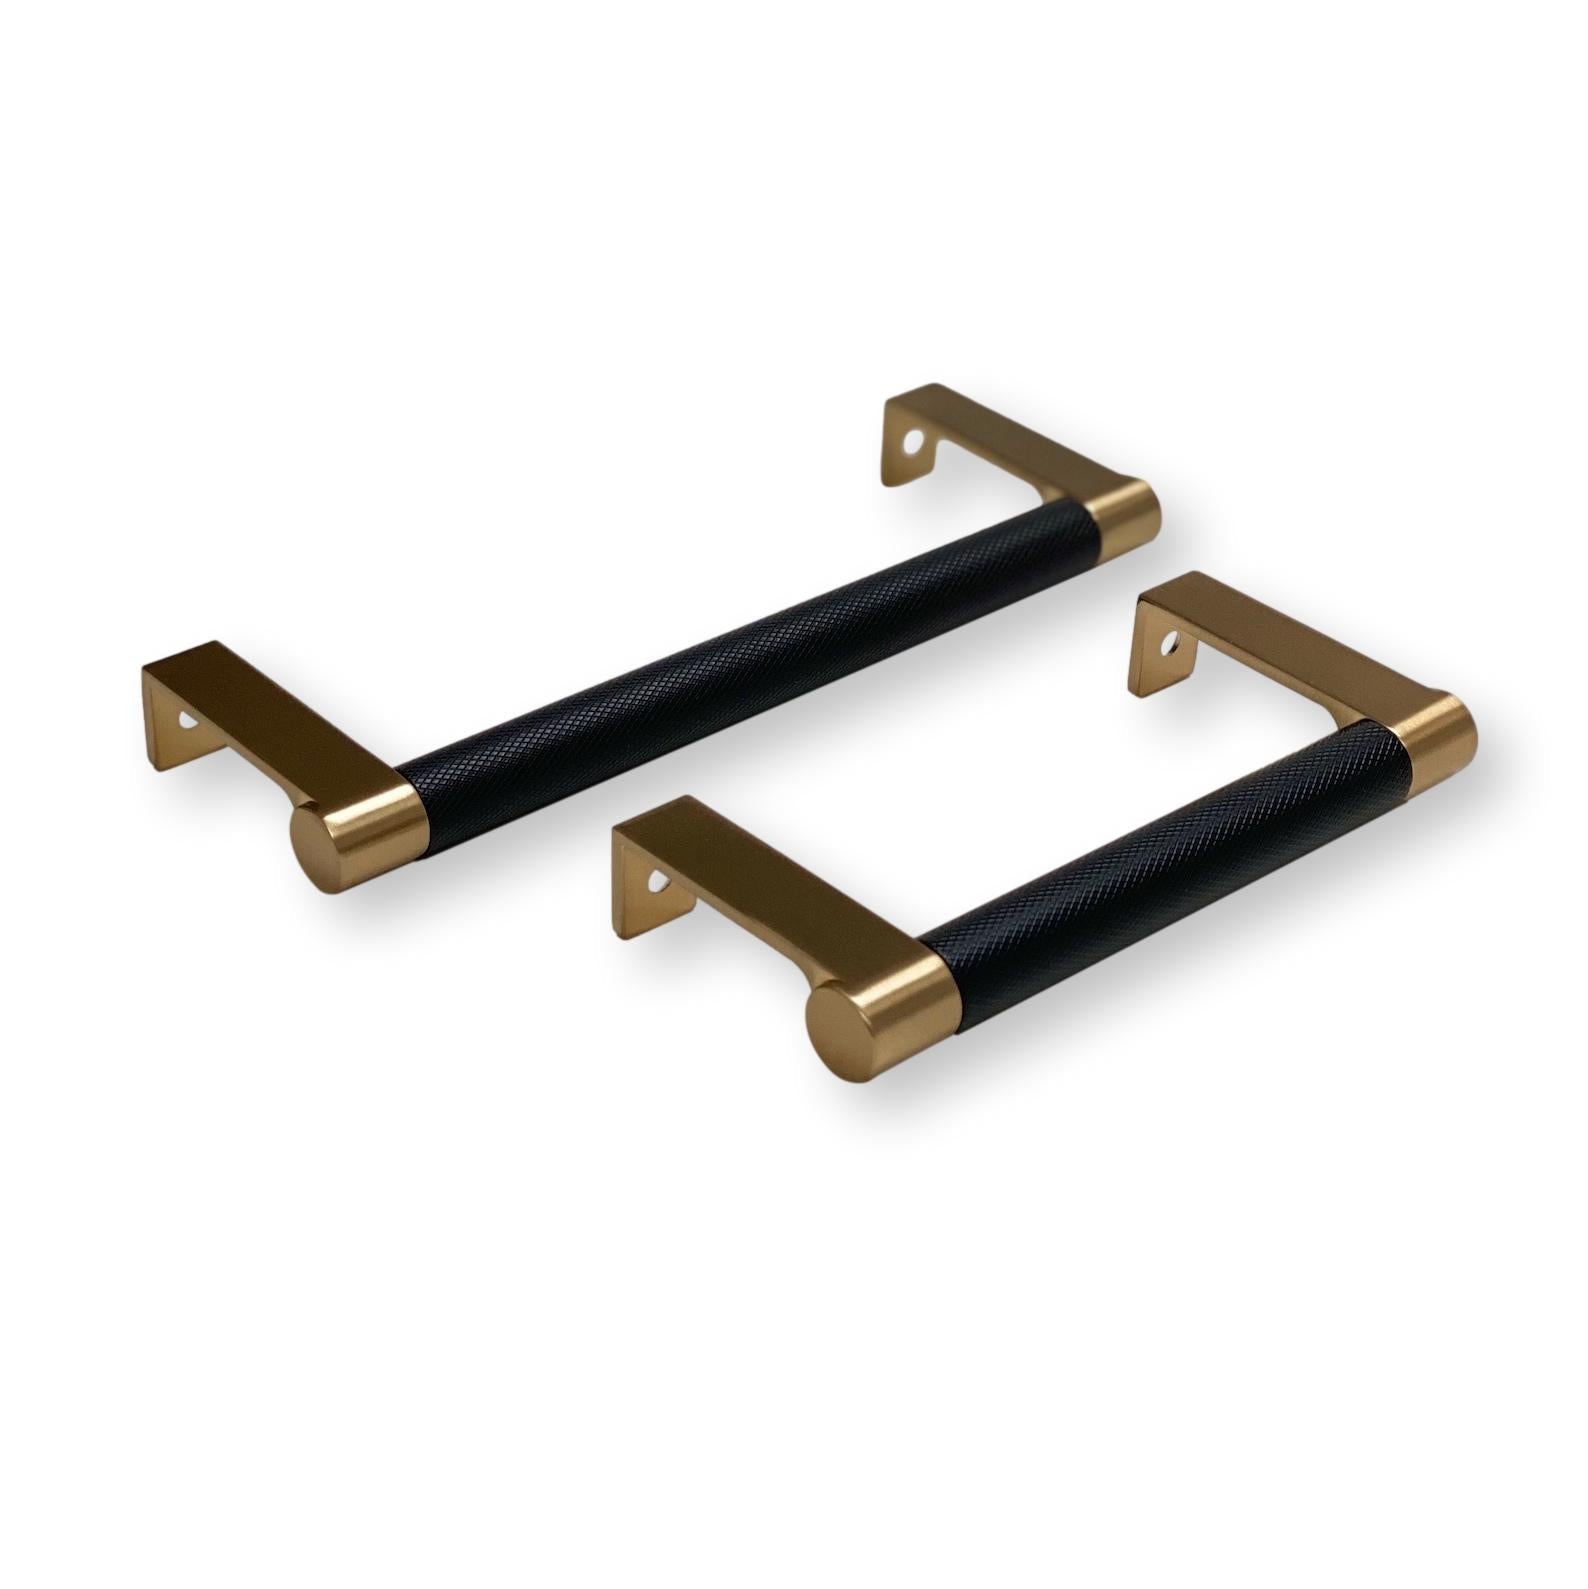 Champagne Bronze and Black "Converse" Knurled Edge Tab Drawer Pulls - Industry Hardware